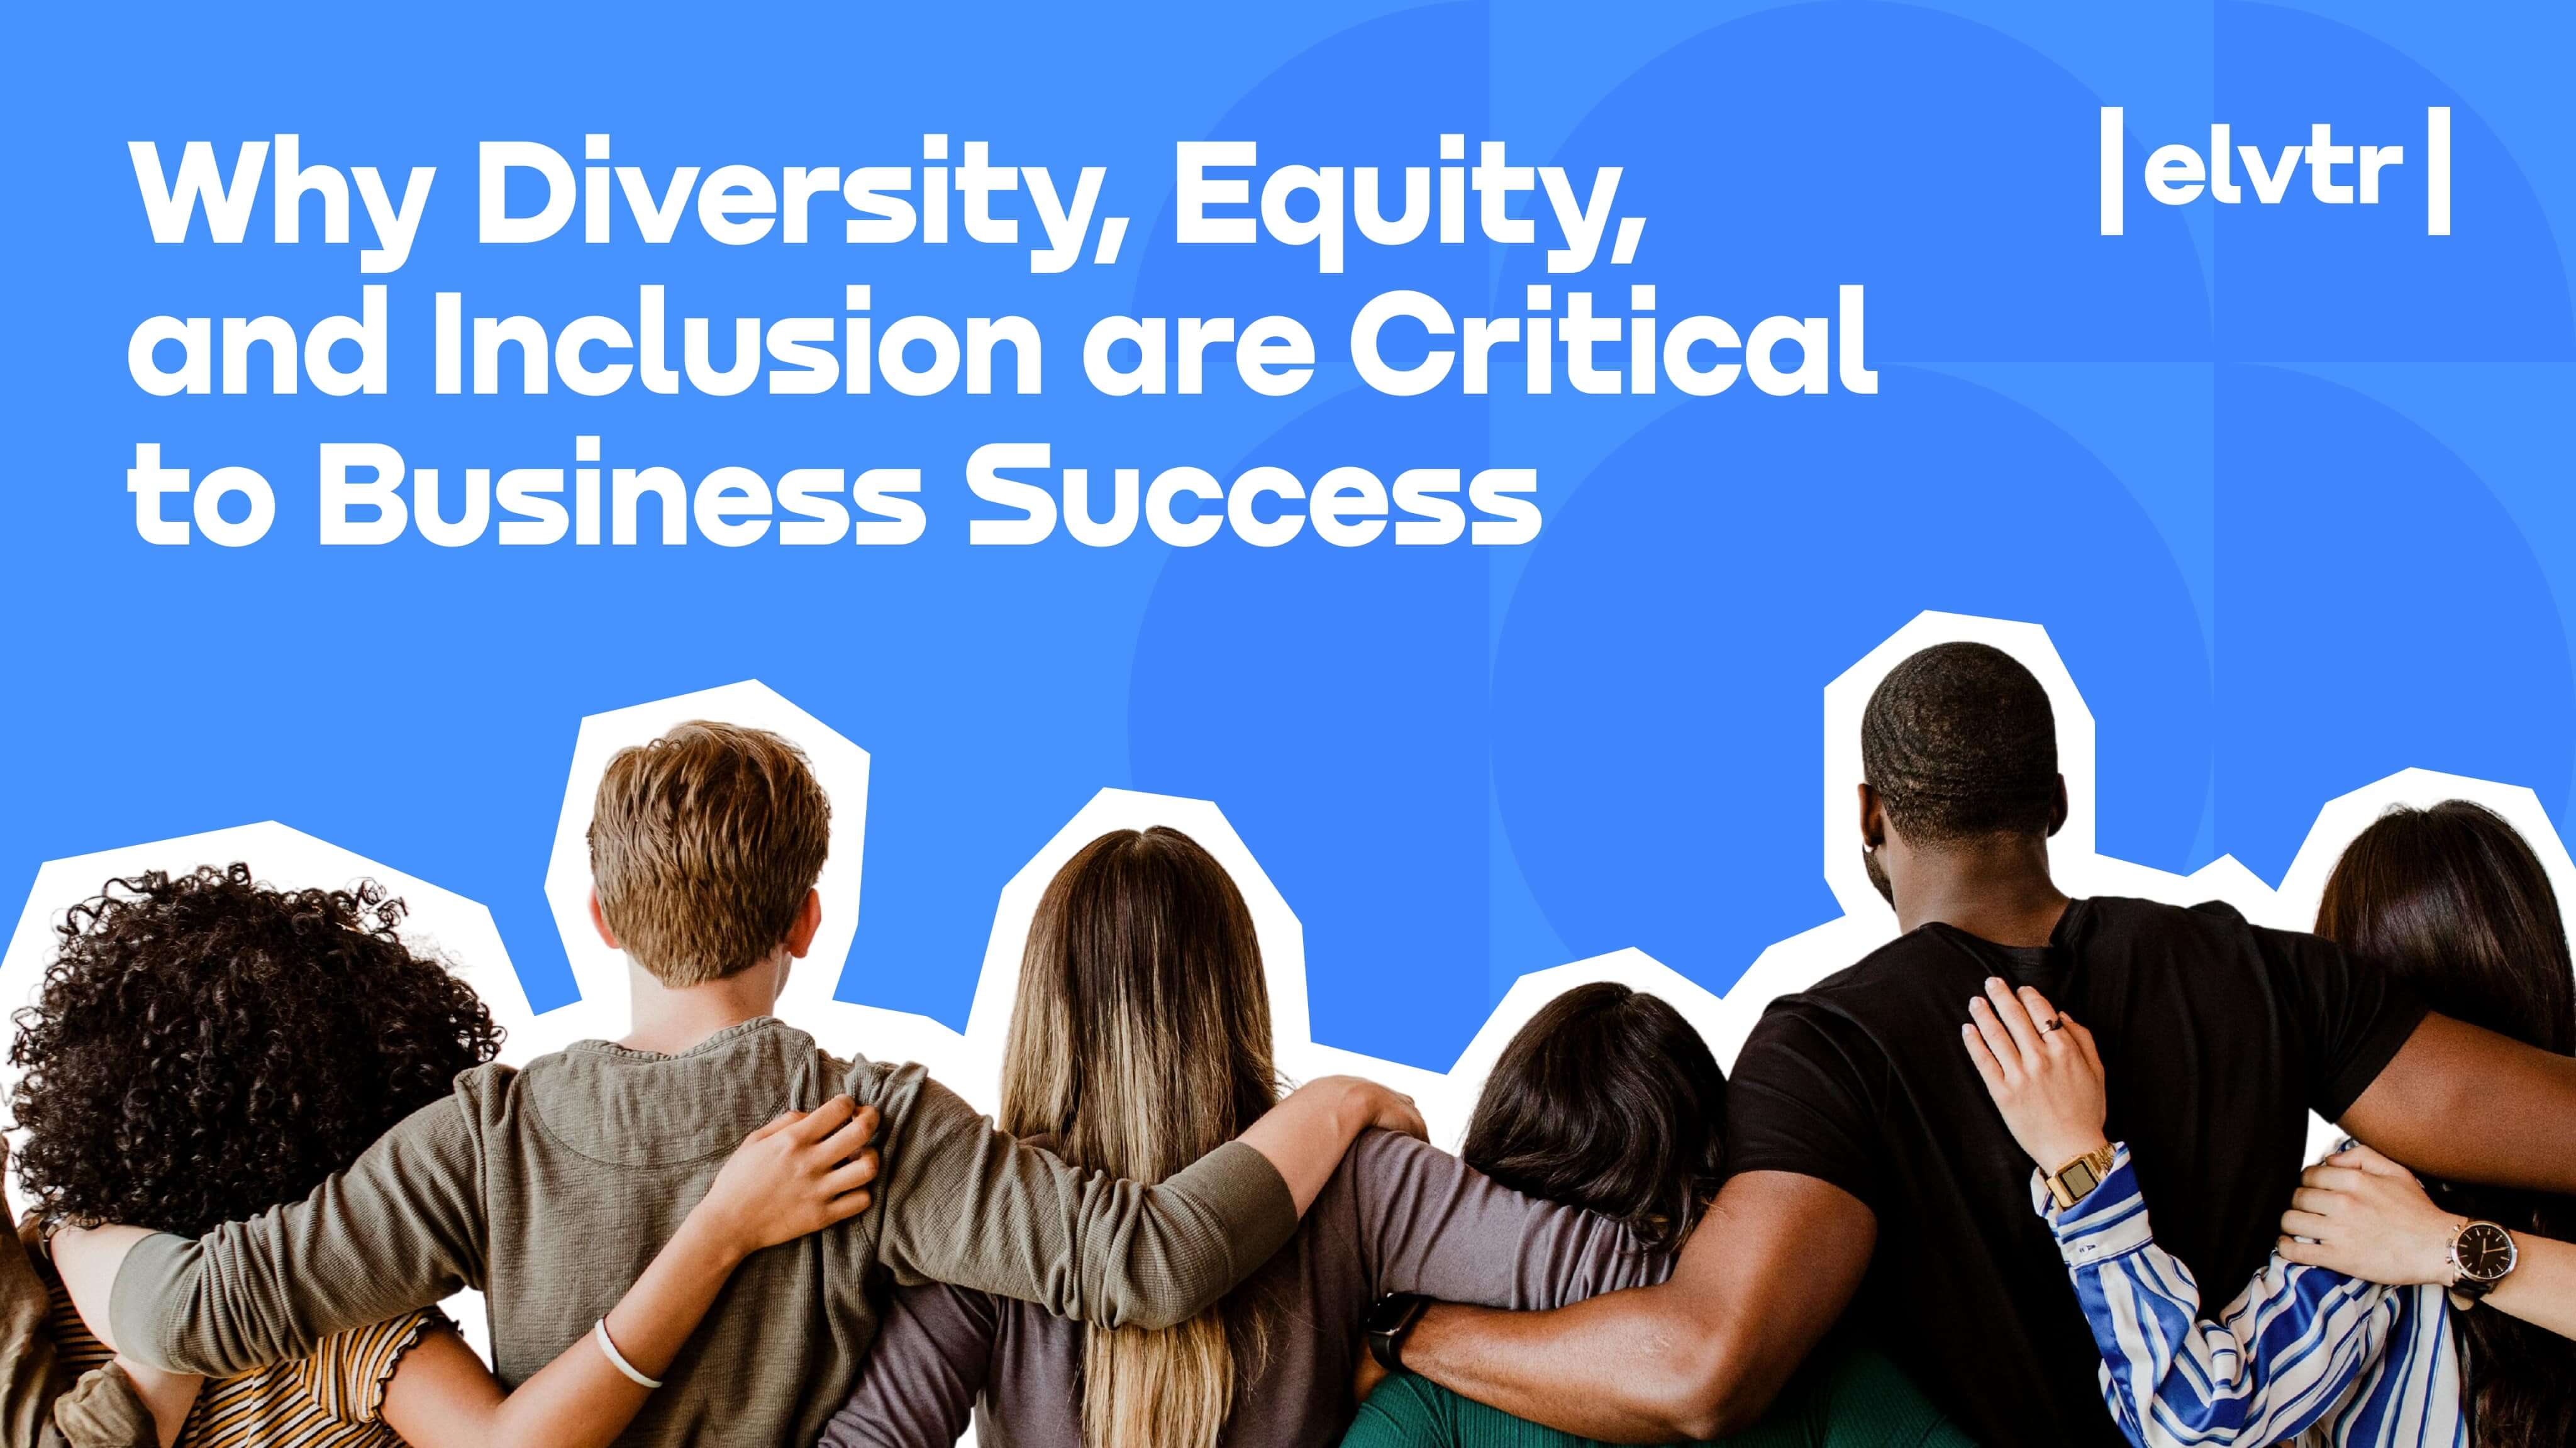 Why Diversity, Equity, and Inclusion are Critical to Business Success image